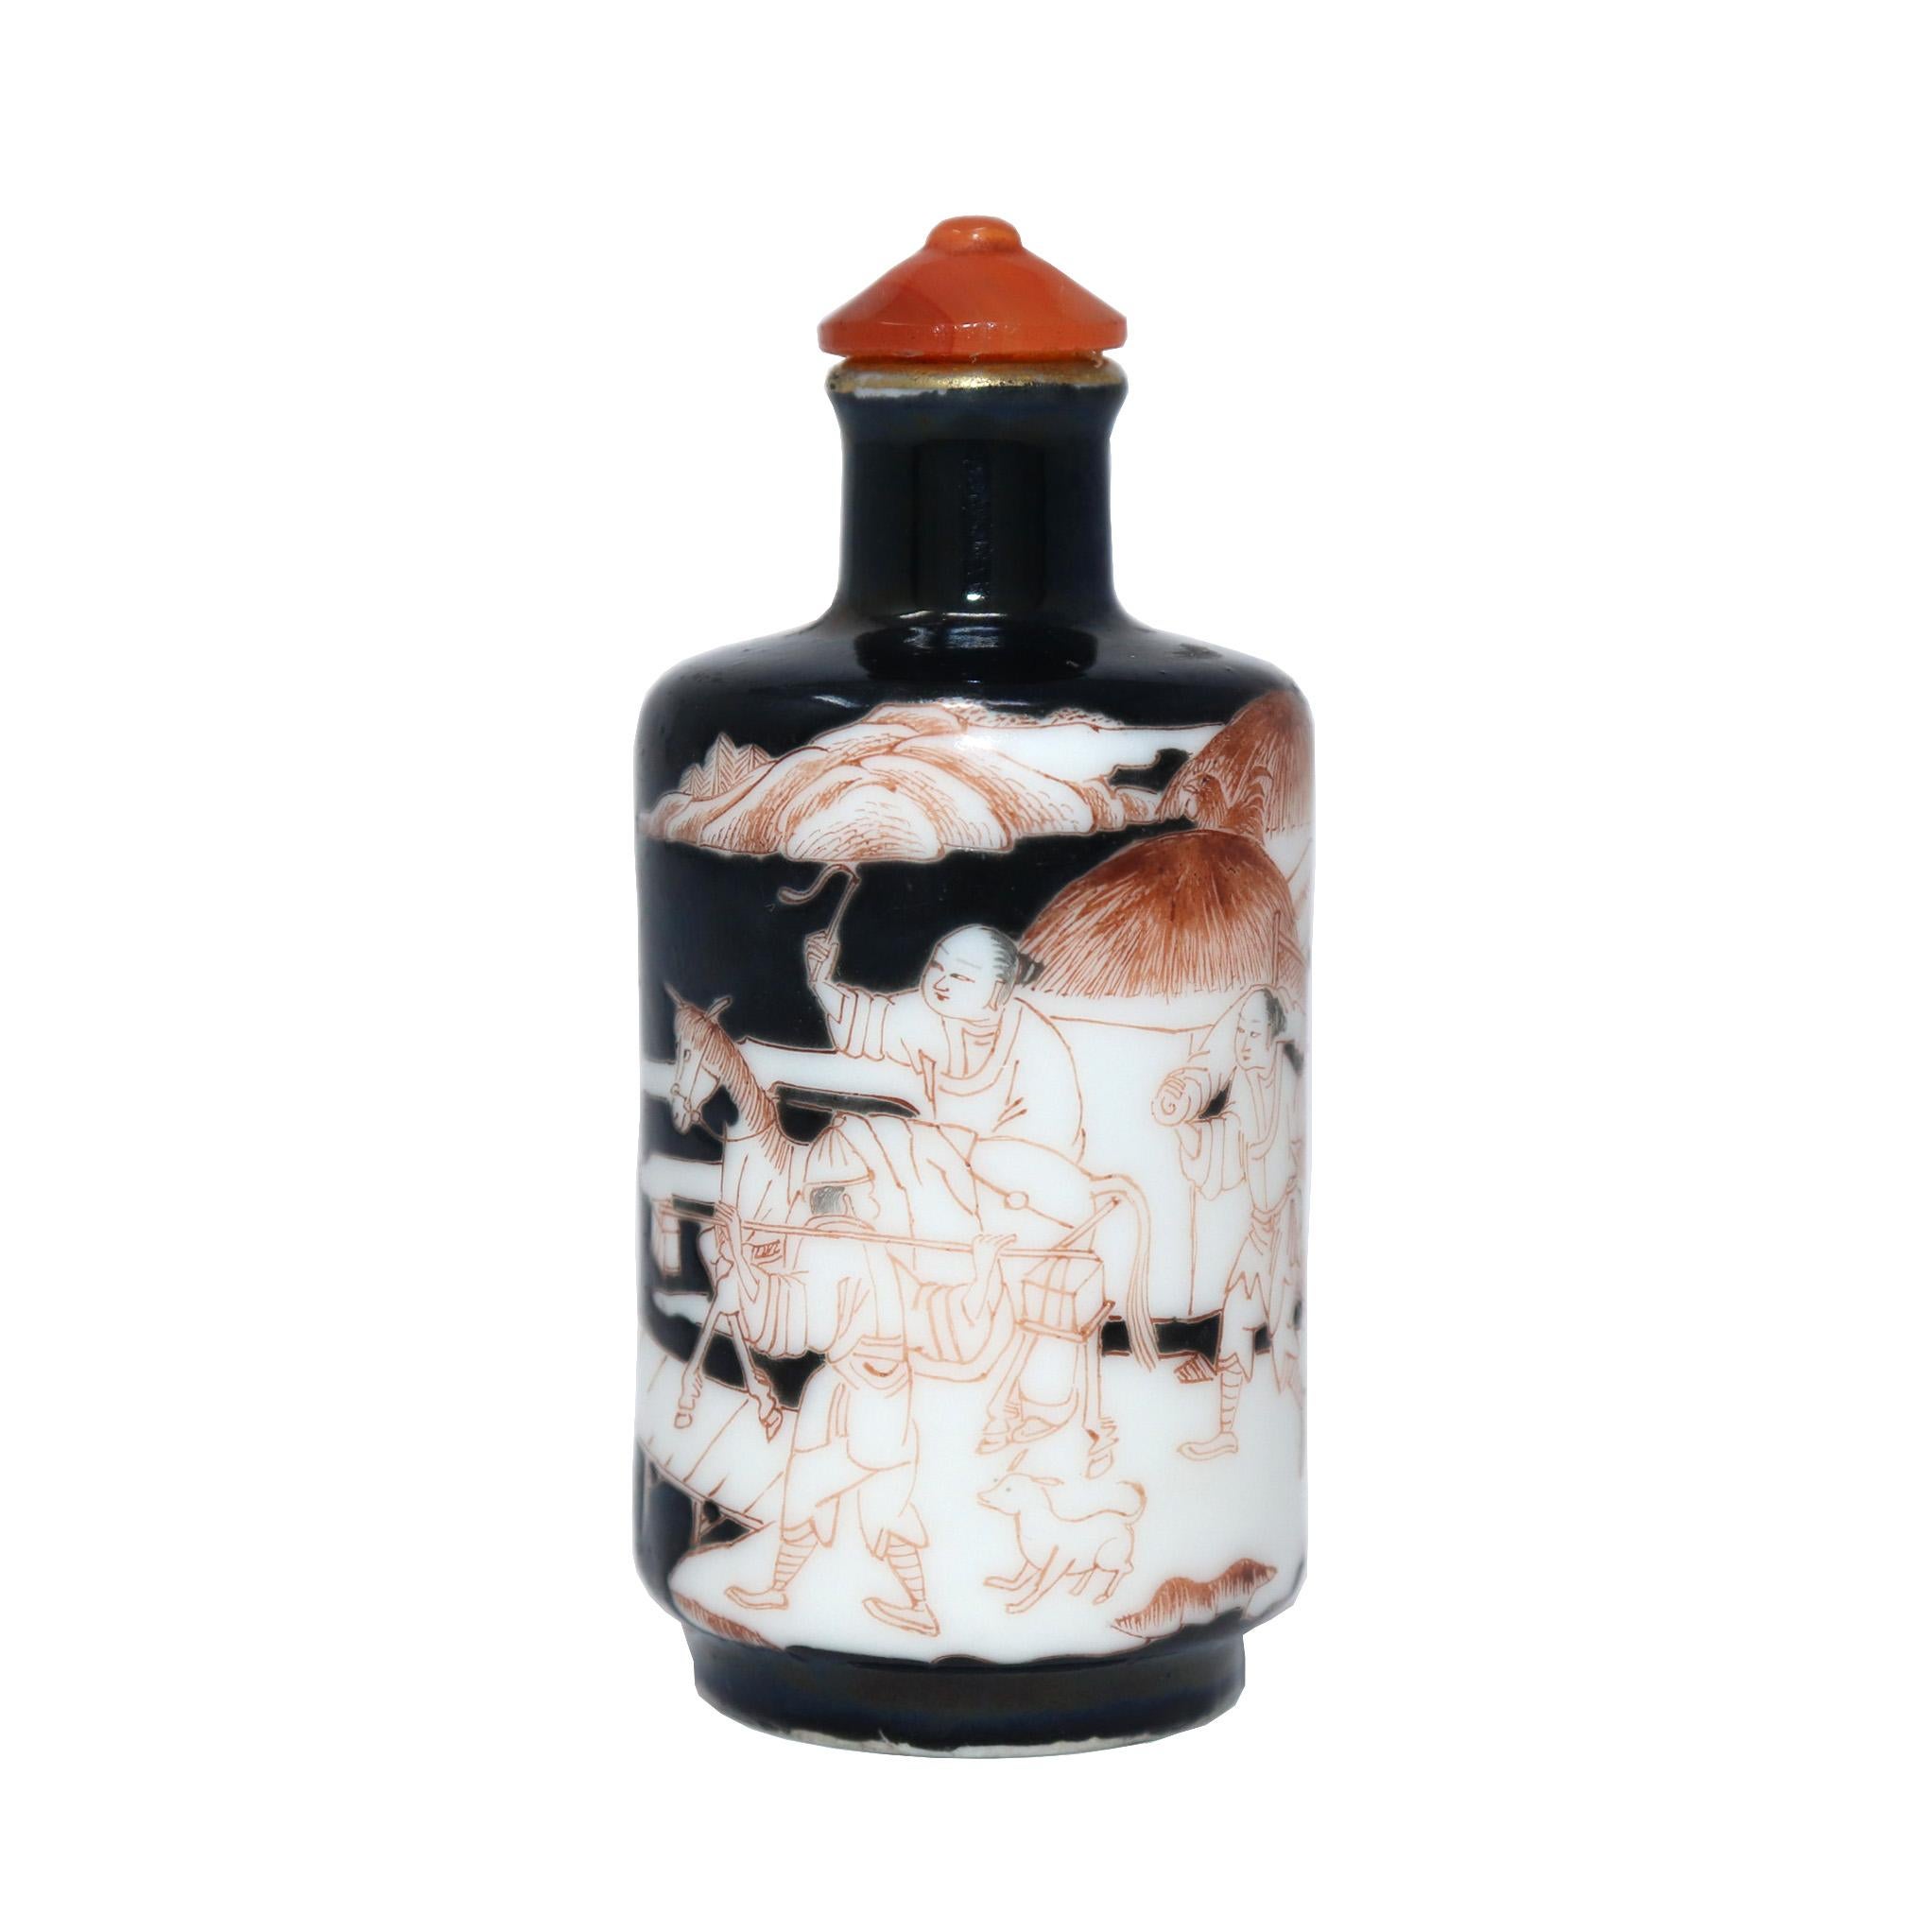 Antique Chinese Enameled Porcelain Snuff Bottle, Jingdezhen Kilns In Good Condition For Sale In New York, NY